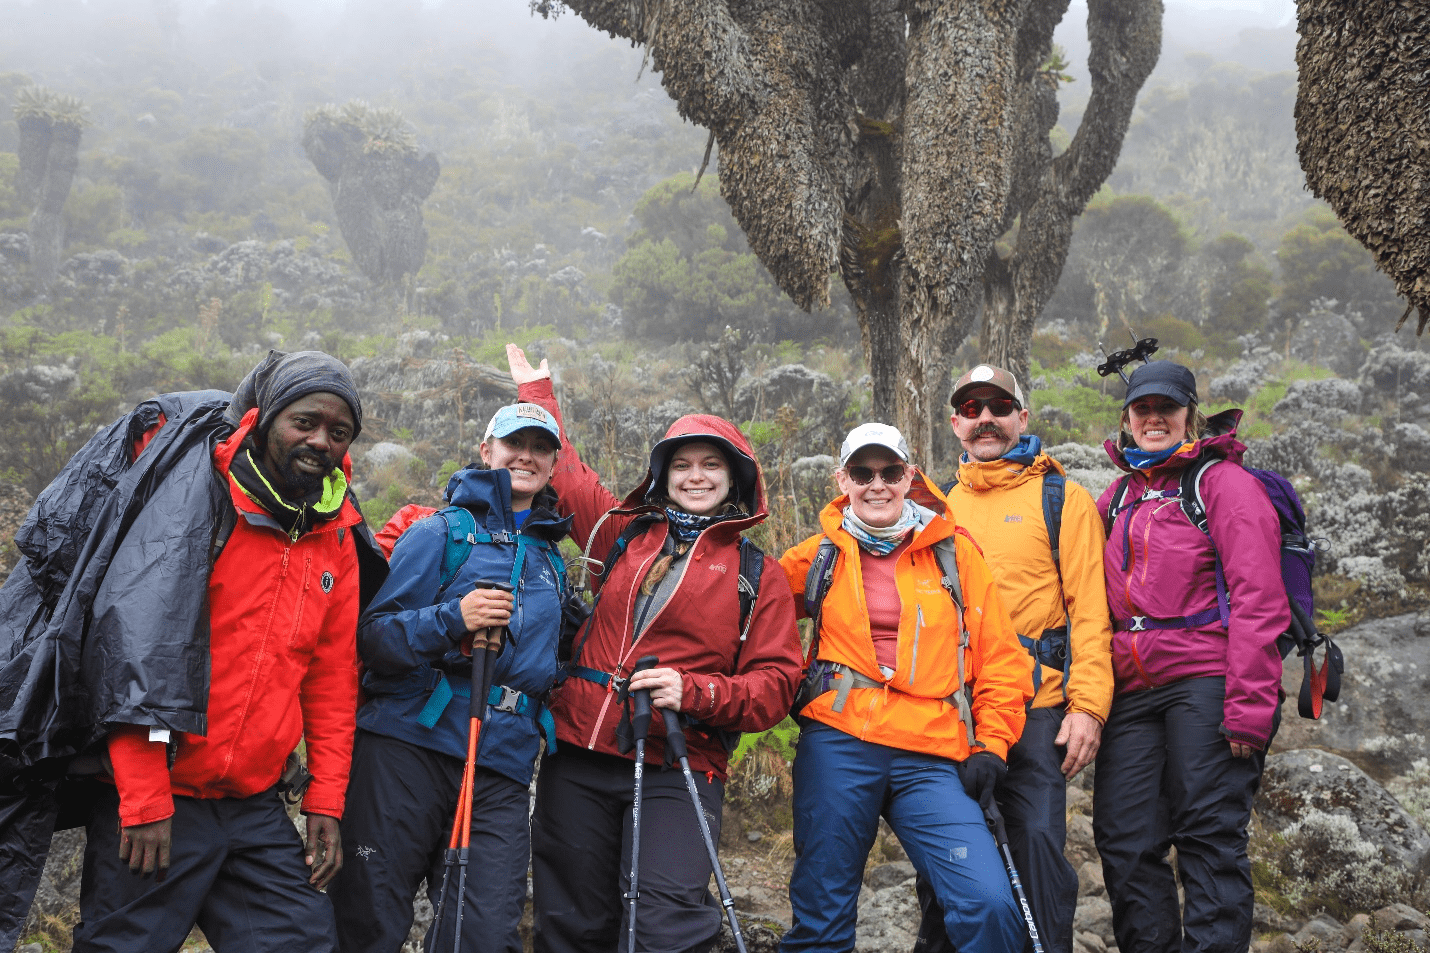 Investing in high-quality gear is a non-negotiable aspect of preparing for Mt. Kilimanjaro climbing tours